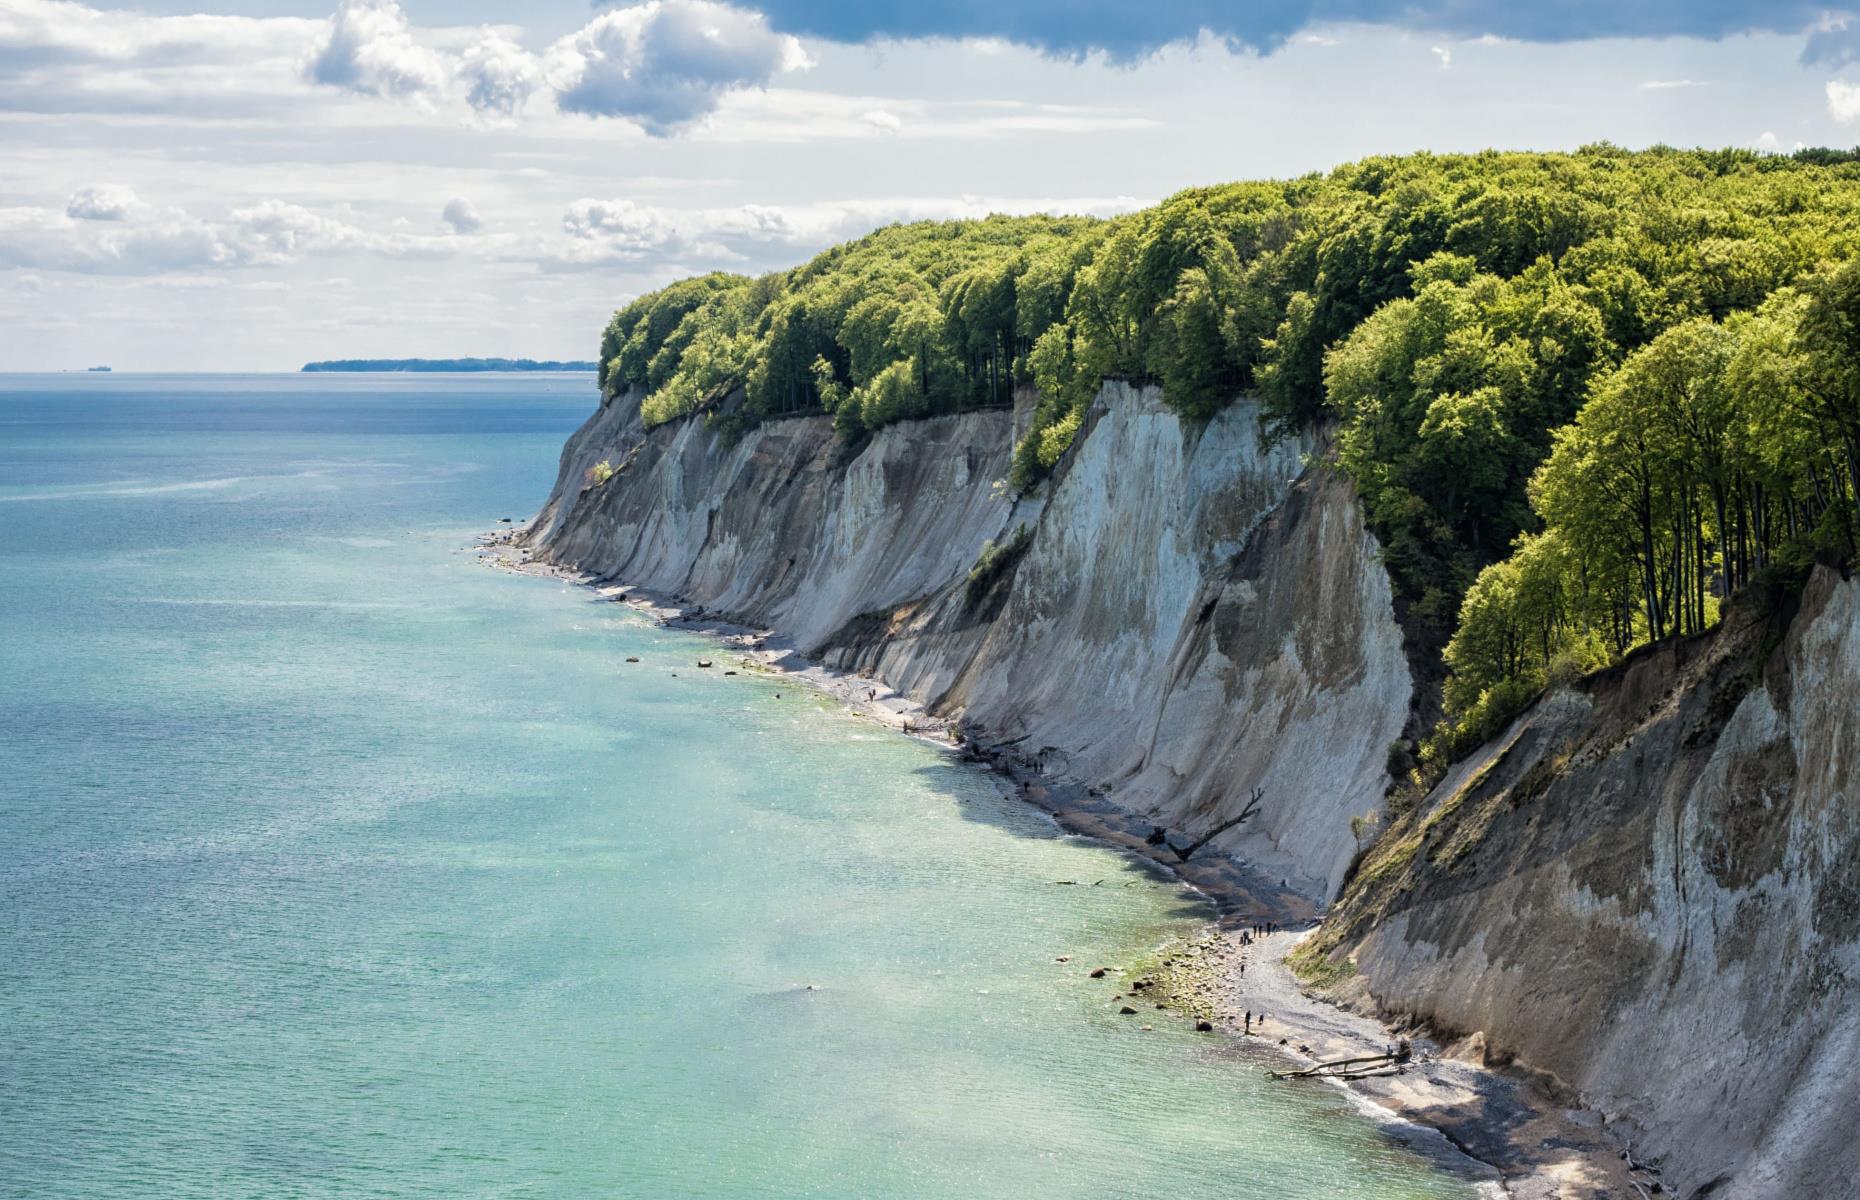 <p>Located on the rocky Jasmund peninsula on the island of Rügen, this park is best known for its dramatic white chalk cliffs, known as the Königsstuhl or “King’s Chair.” While the cliffs get all the attention, it’s also worth seeing <a href="https://www.germany.travel/en/nature-outdoor-activities/jasmund-national-park.html">Jasmund’s</a> bountiful flora and fauna, specifically the ancient beech forests, different varieties of birds and protected orchids that bloom in meadows throughout the park. The area attracts many hikers, who can explore serene forest trails or take a coastal route for some breathtaking views.</p>